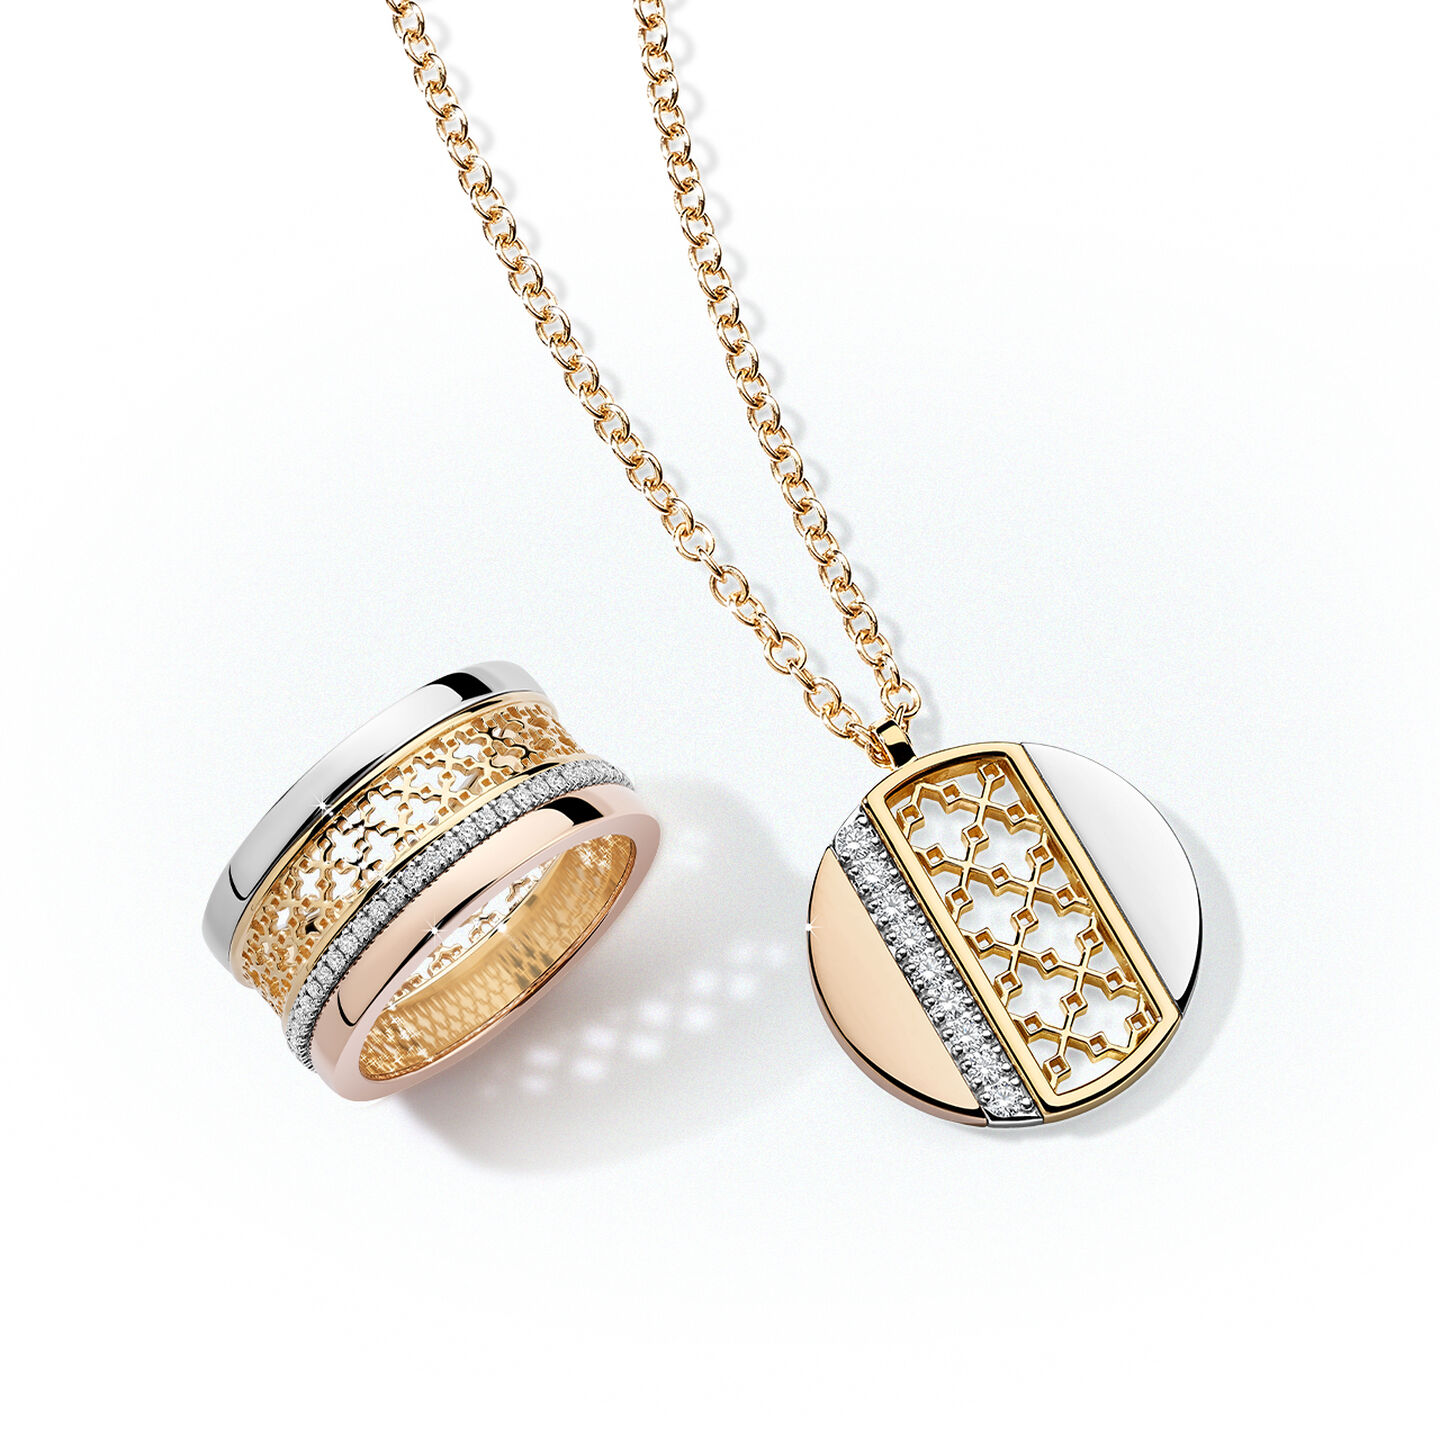 Tri-gold Ring and pendant necklace